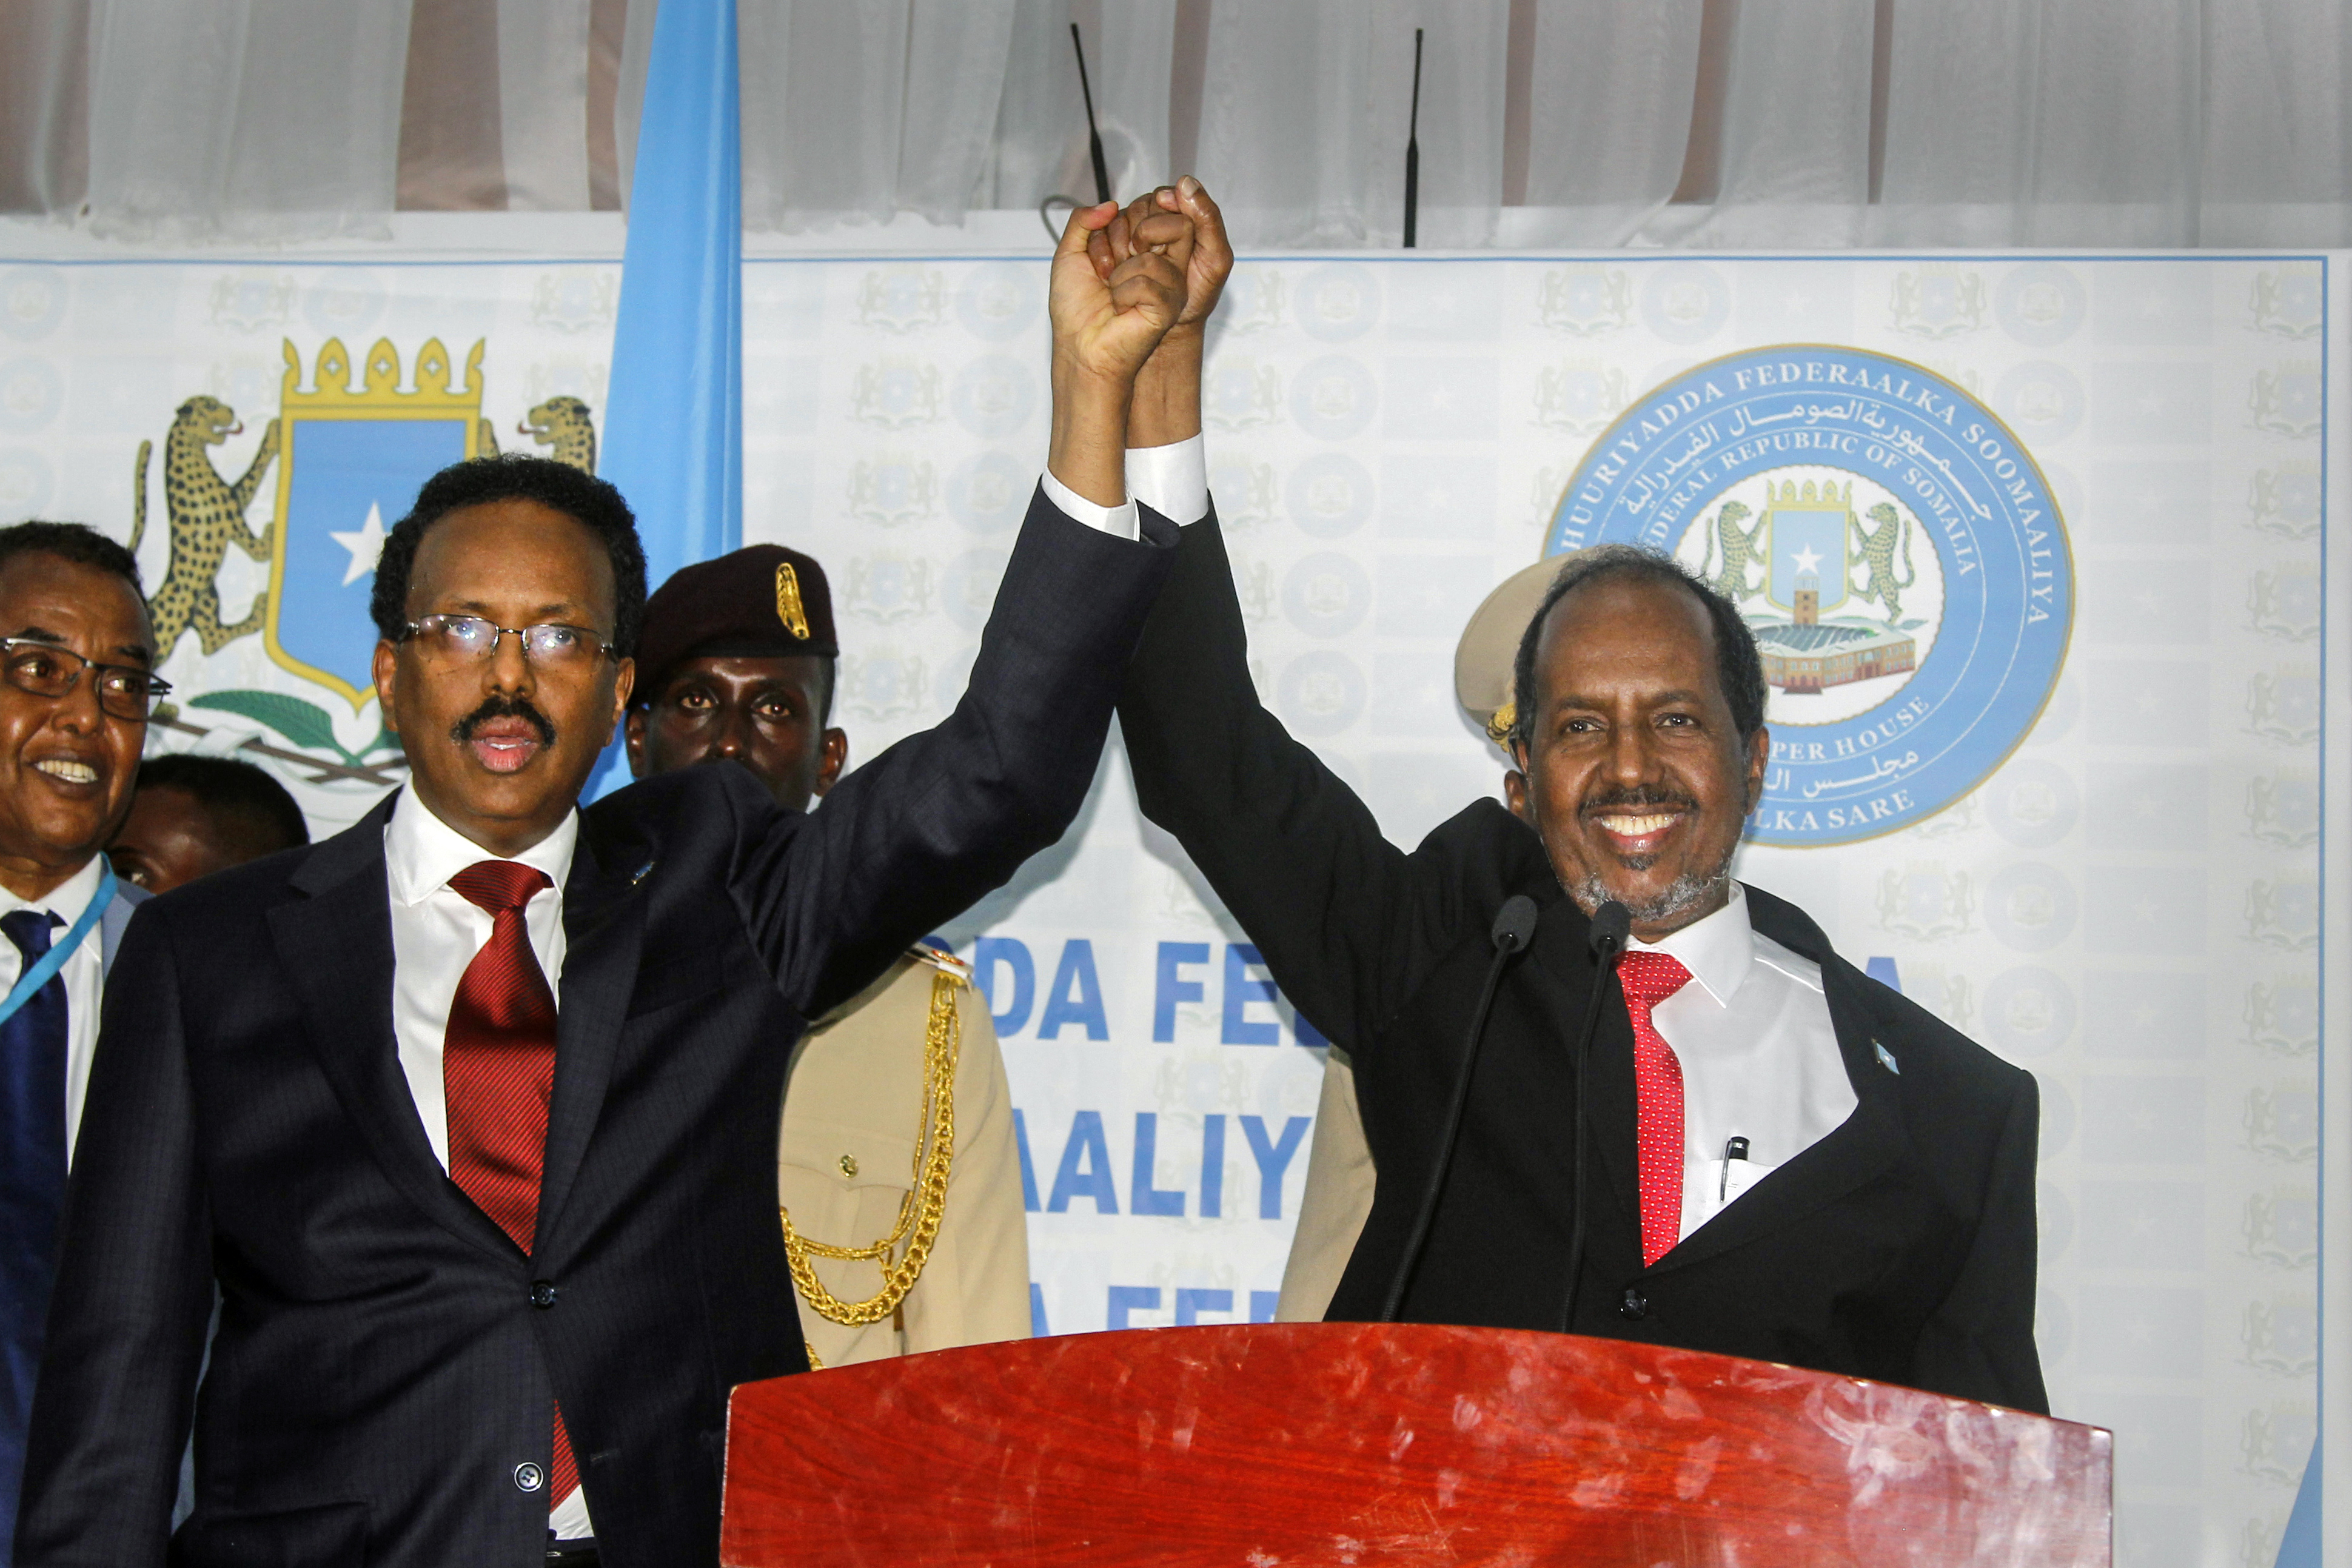 UN congratulates President Hassan Sheikh Mohamud on inauguration